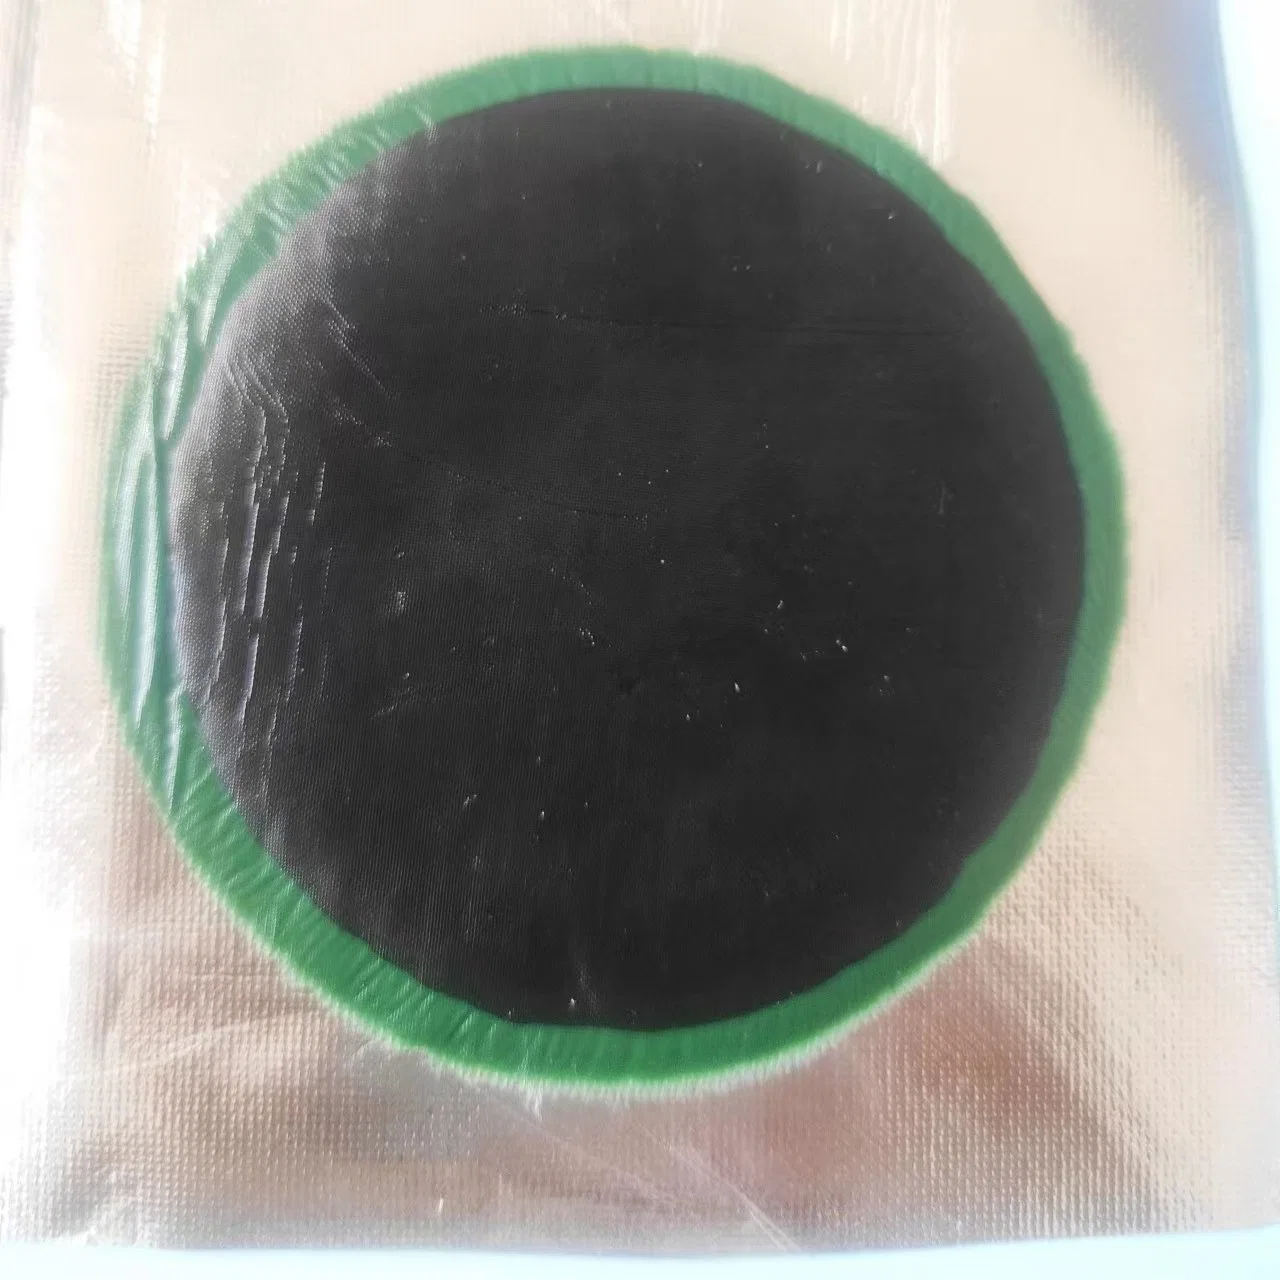 75mm Tire Cold Patch for Tubeless Tire